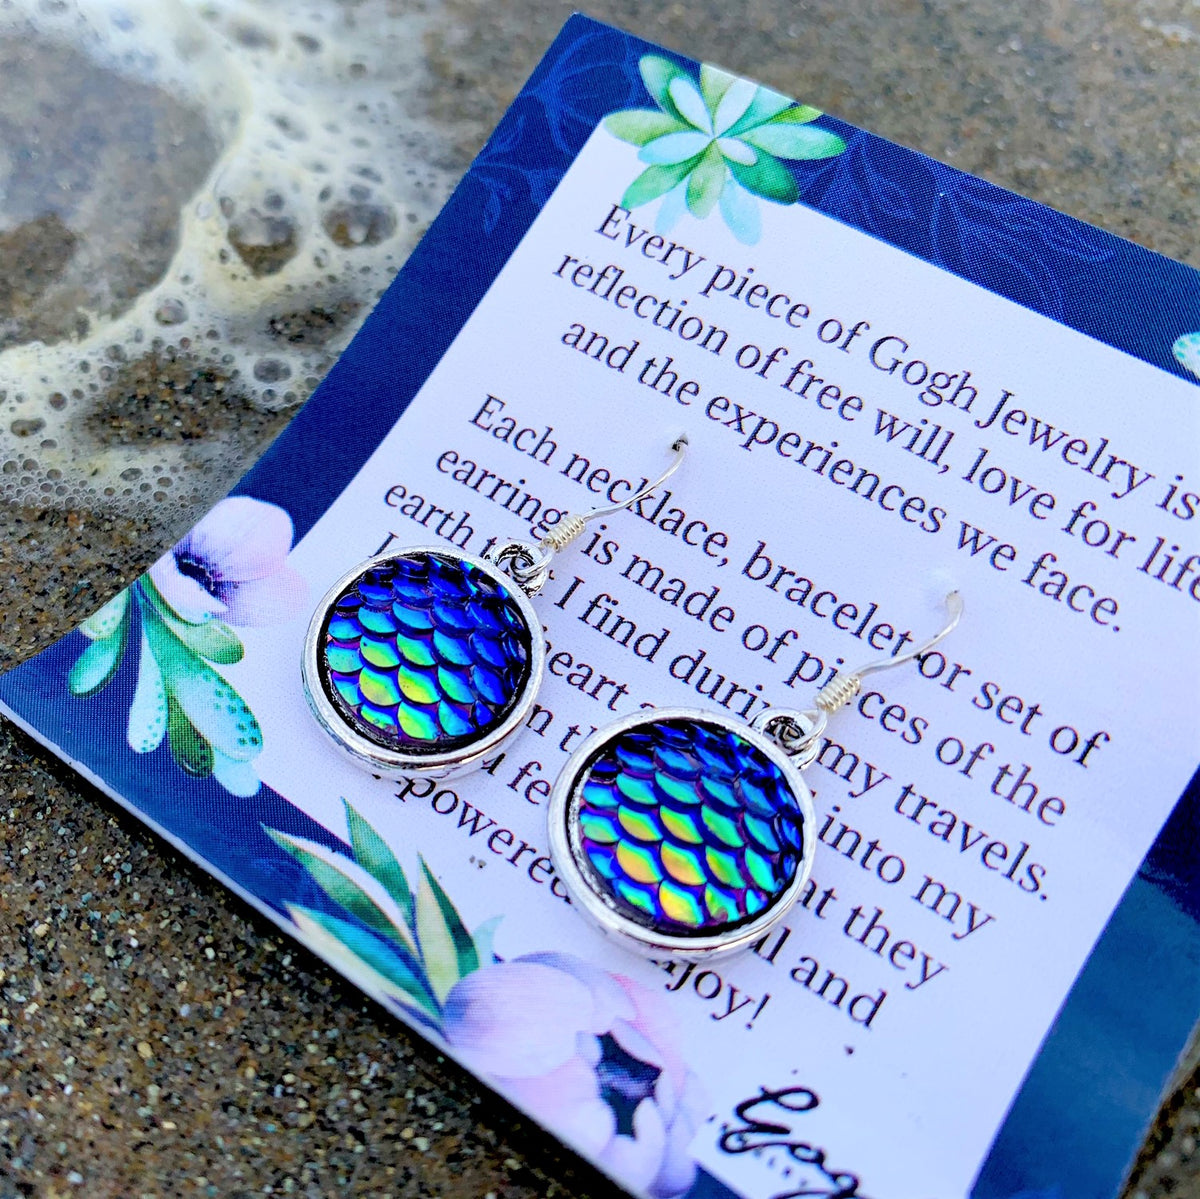 Be a Mermaid and Make Waves - Ocean Lovers Earrings with Fish Scale Druzy Cabochon